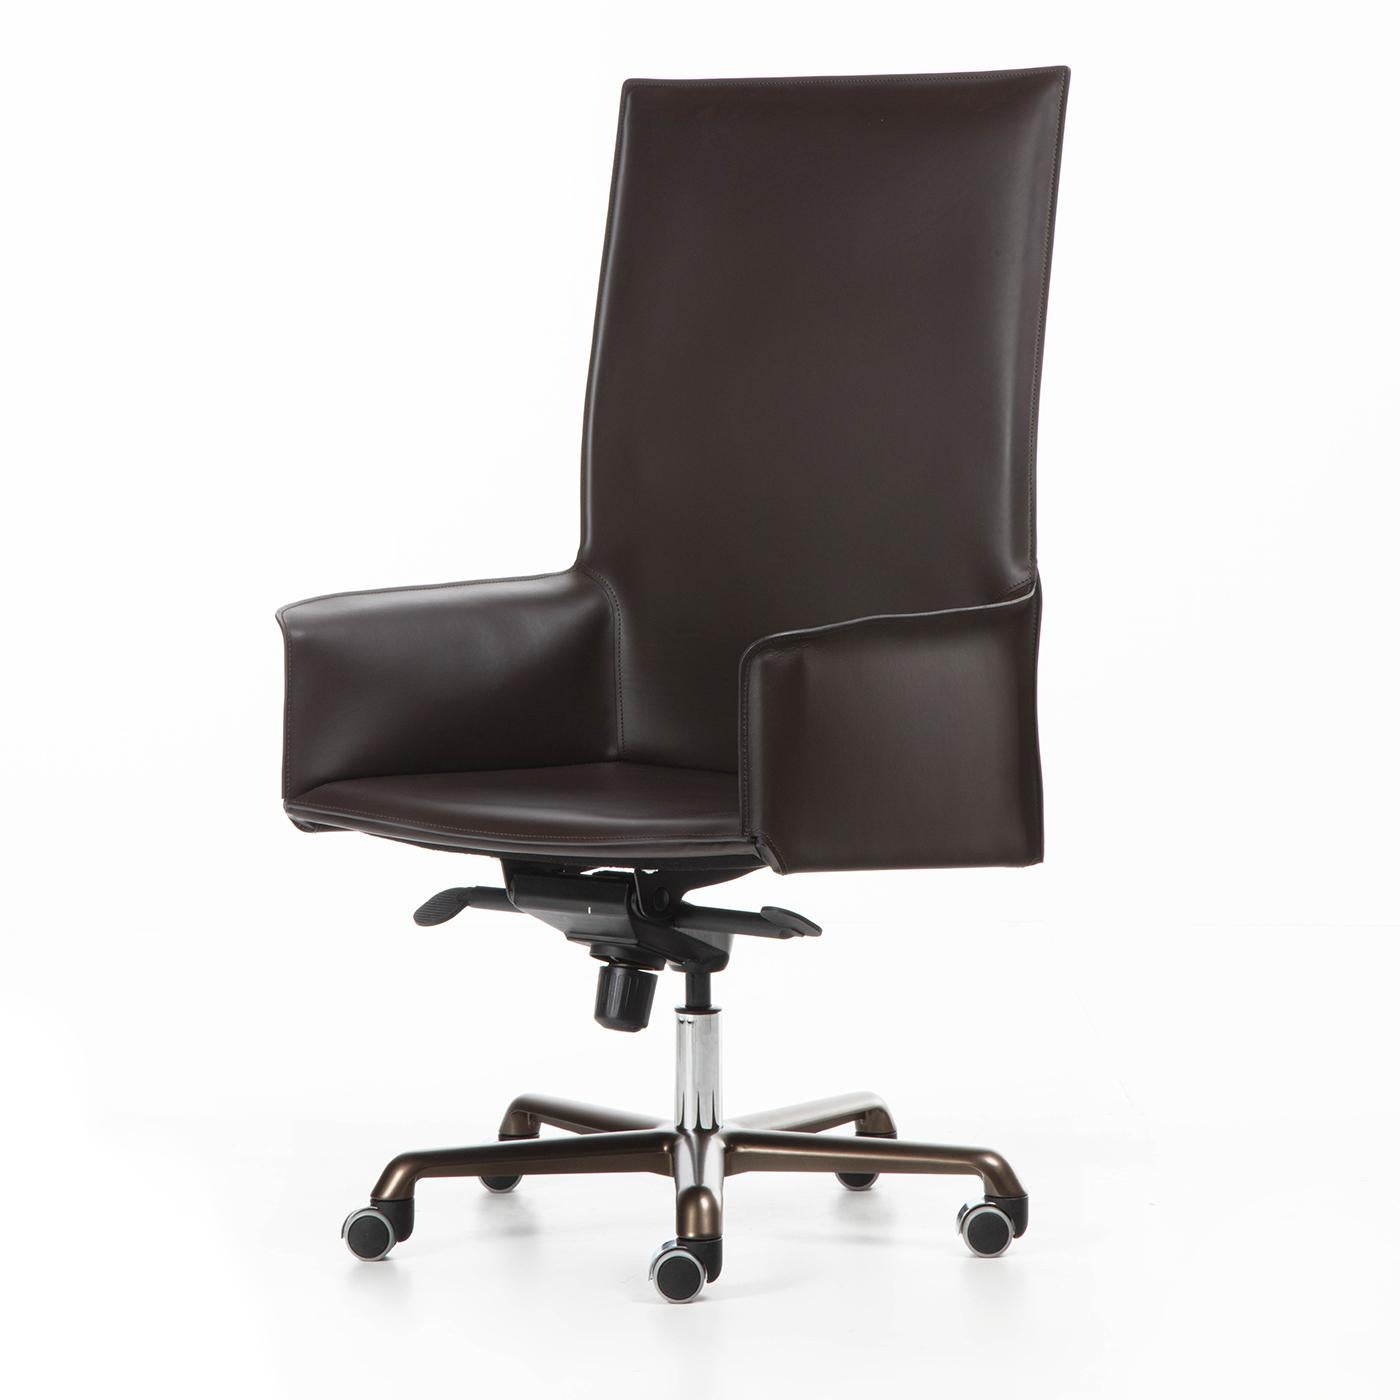 Pasqualina Swivel President Chair by Grassi&Bianchi and RedCreative In New Condition For Sale In Milan, IT